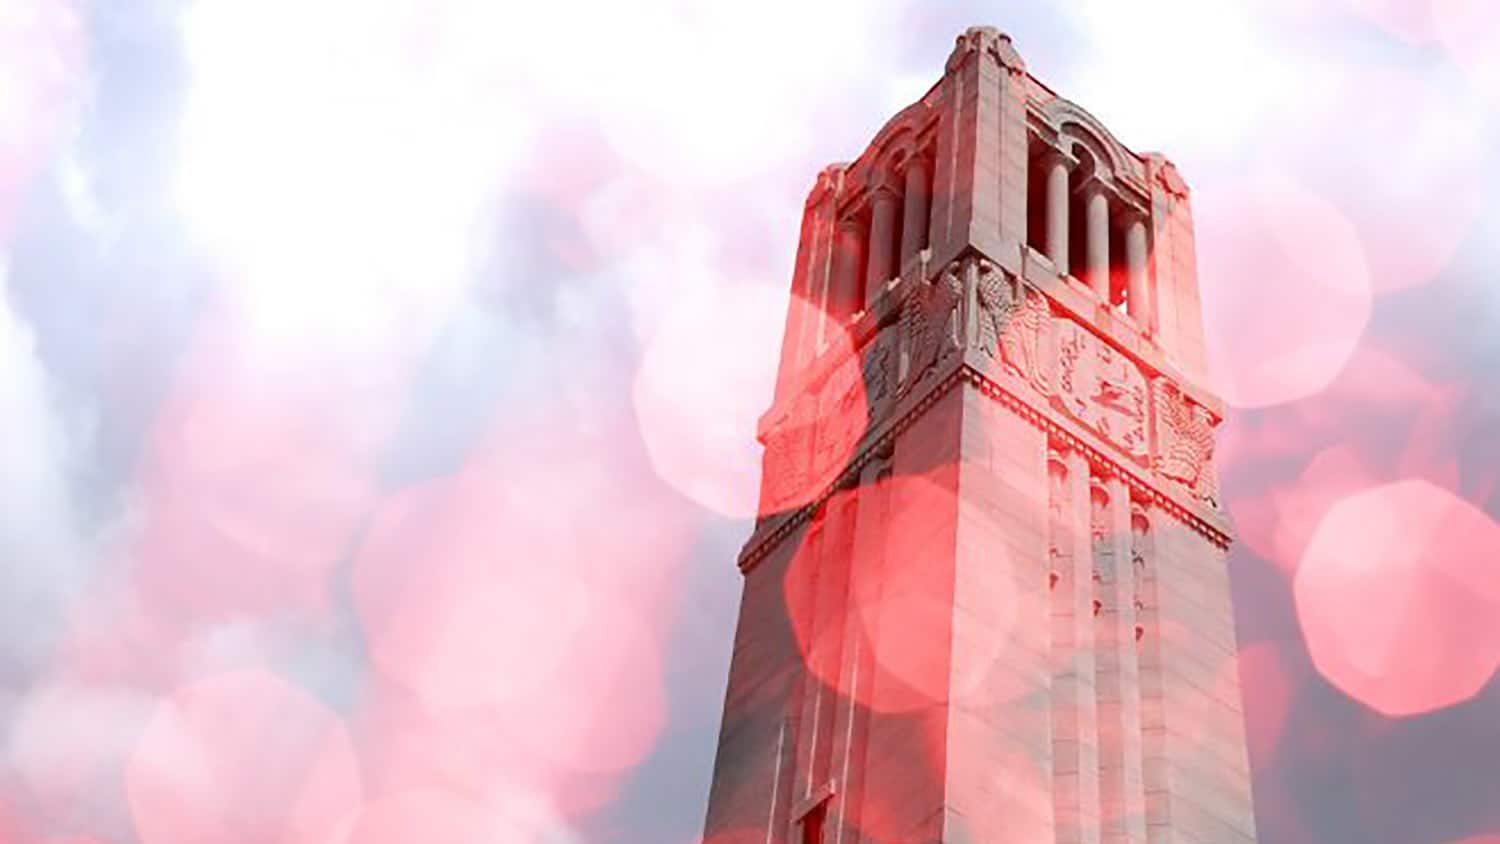 NC State Belltower lit red